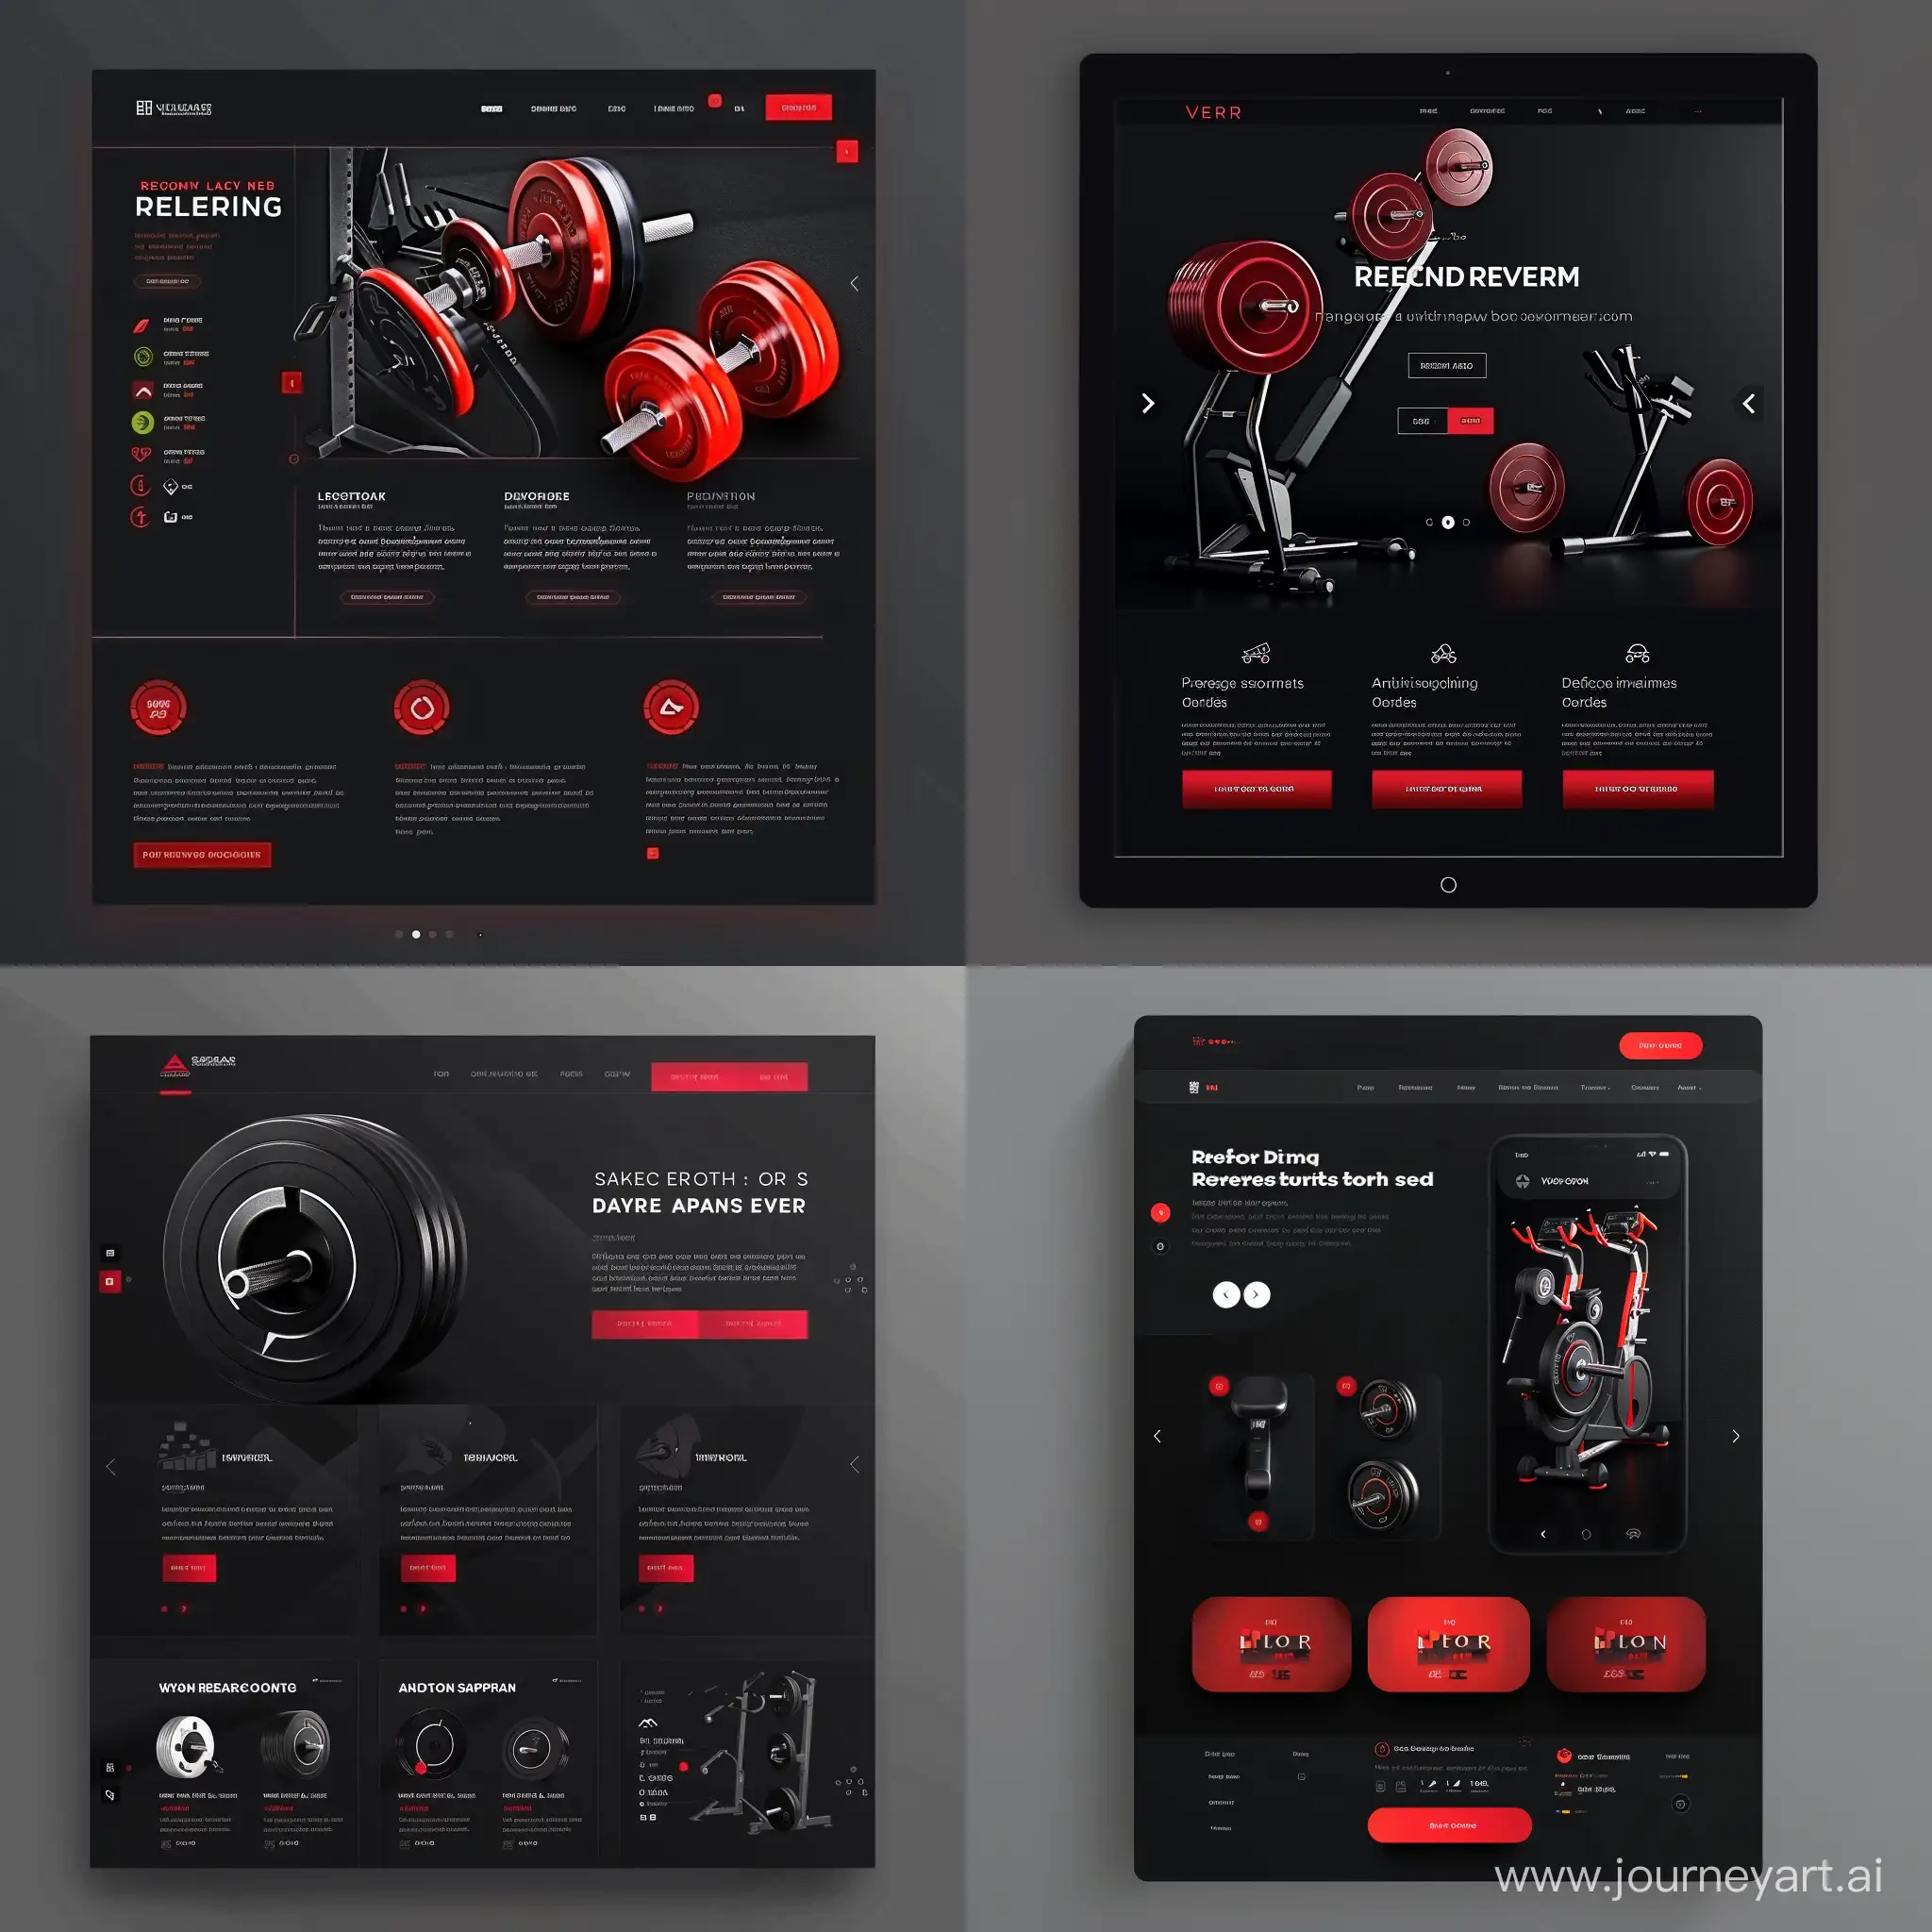 Create a dynamic gym website for the fitness enthusiast. With a sleek black background symbolizing resilience, accentuated with red buttons for vitality. Offer easy navigation to personalized plans, progress tracking, and community support.